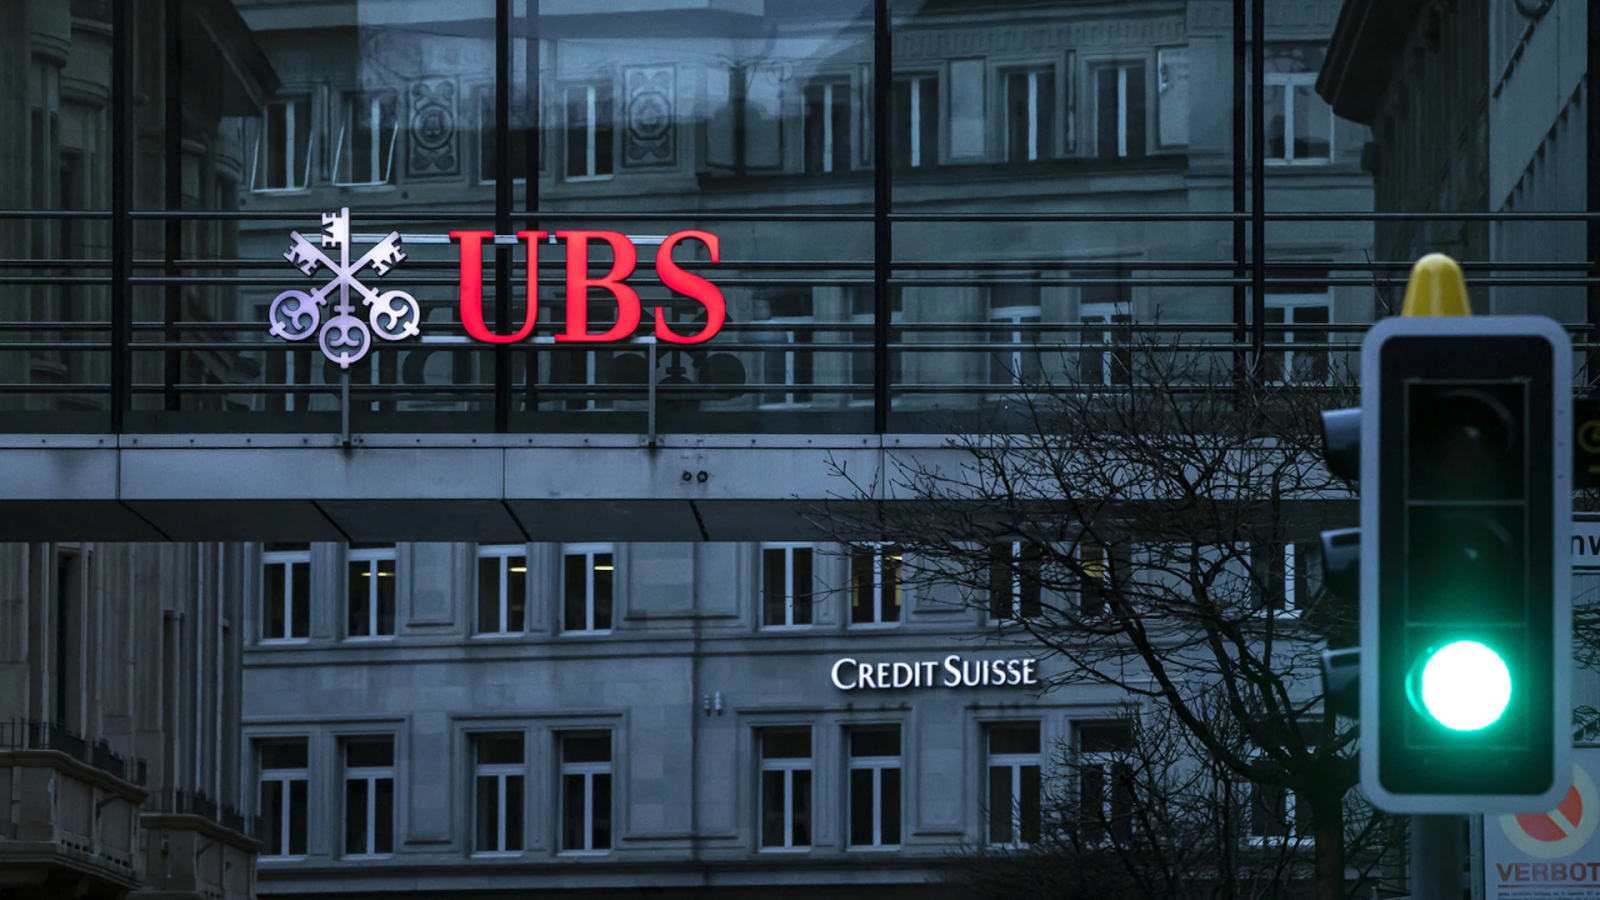 UBS agreed to buy its embattled rival Credit Suisse for 3 billion Swiss francs ($3.2 billion) Sunday.